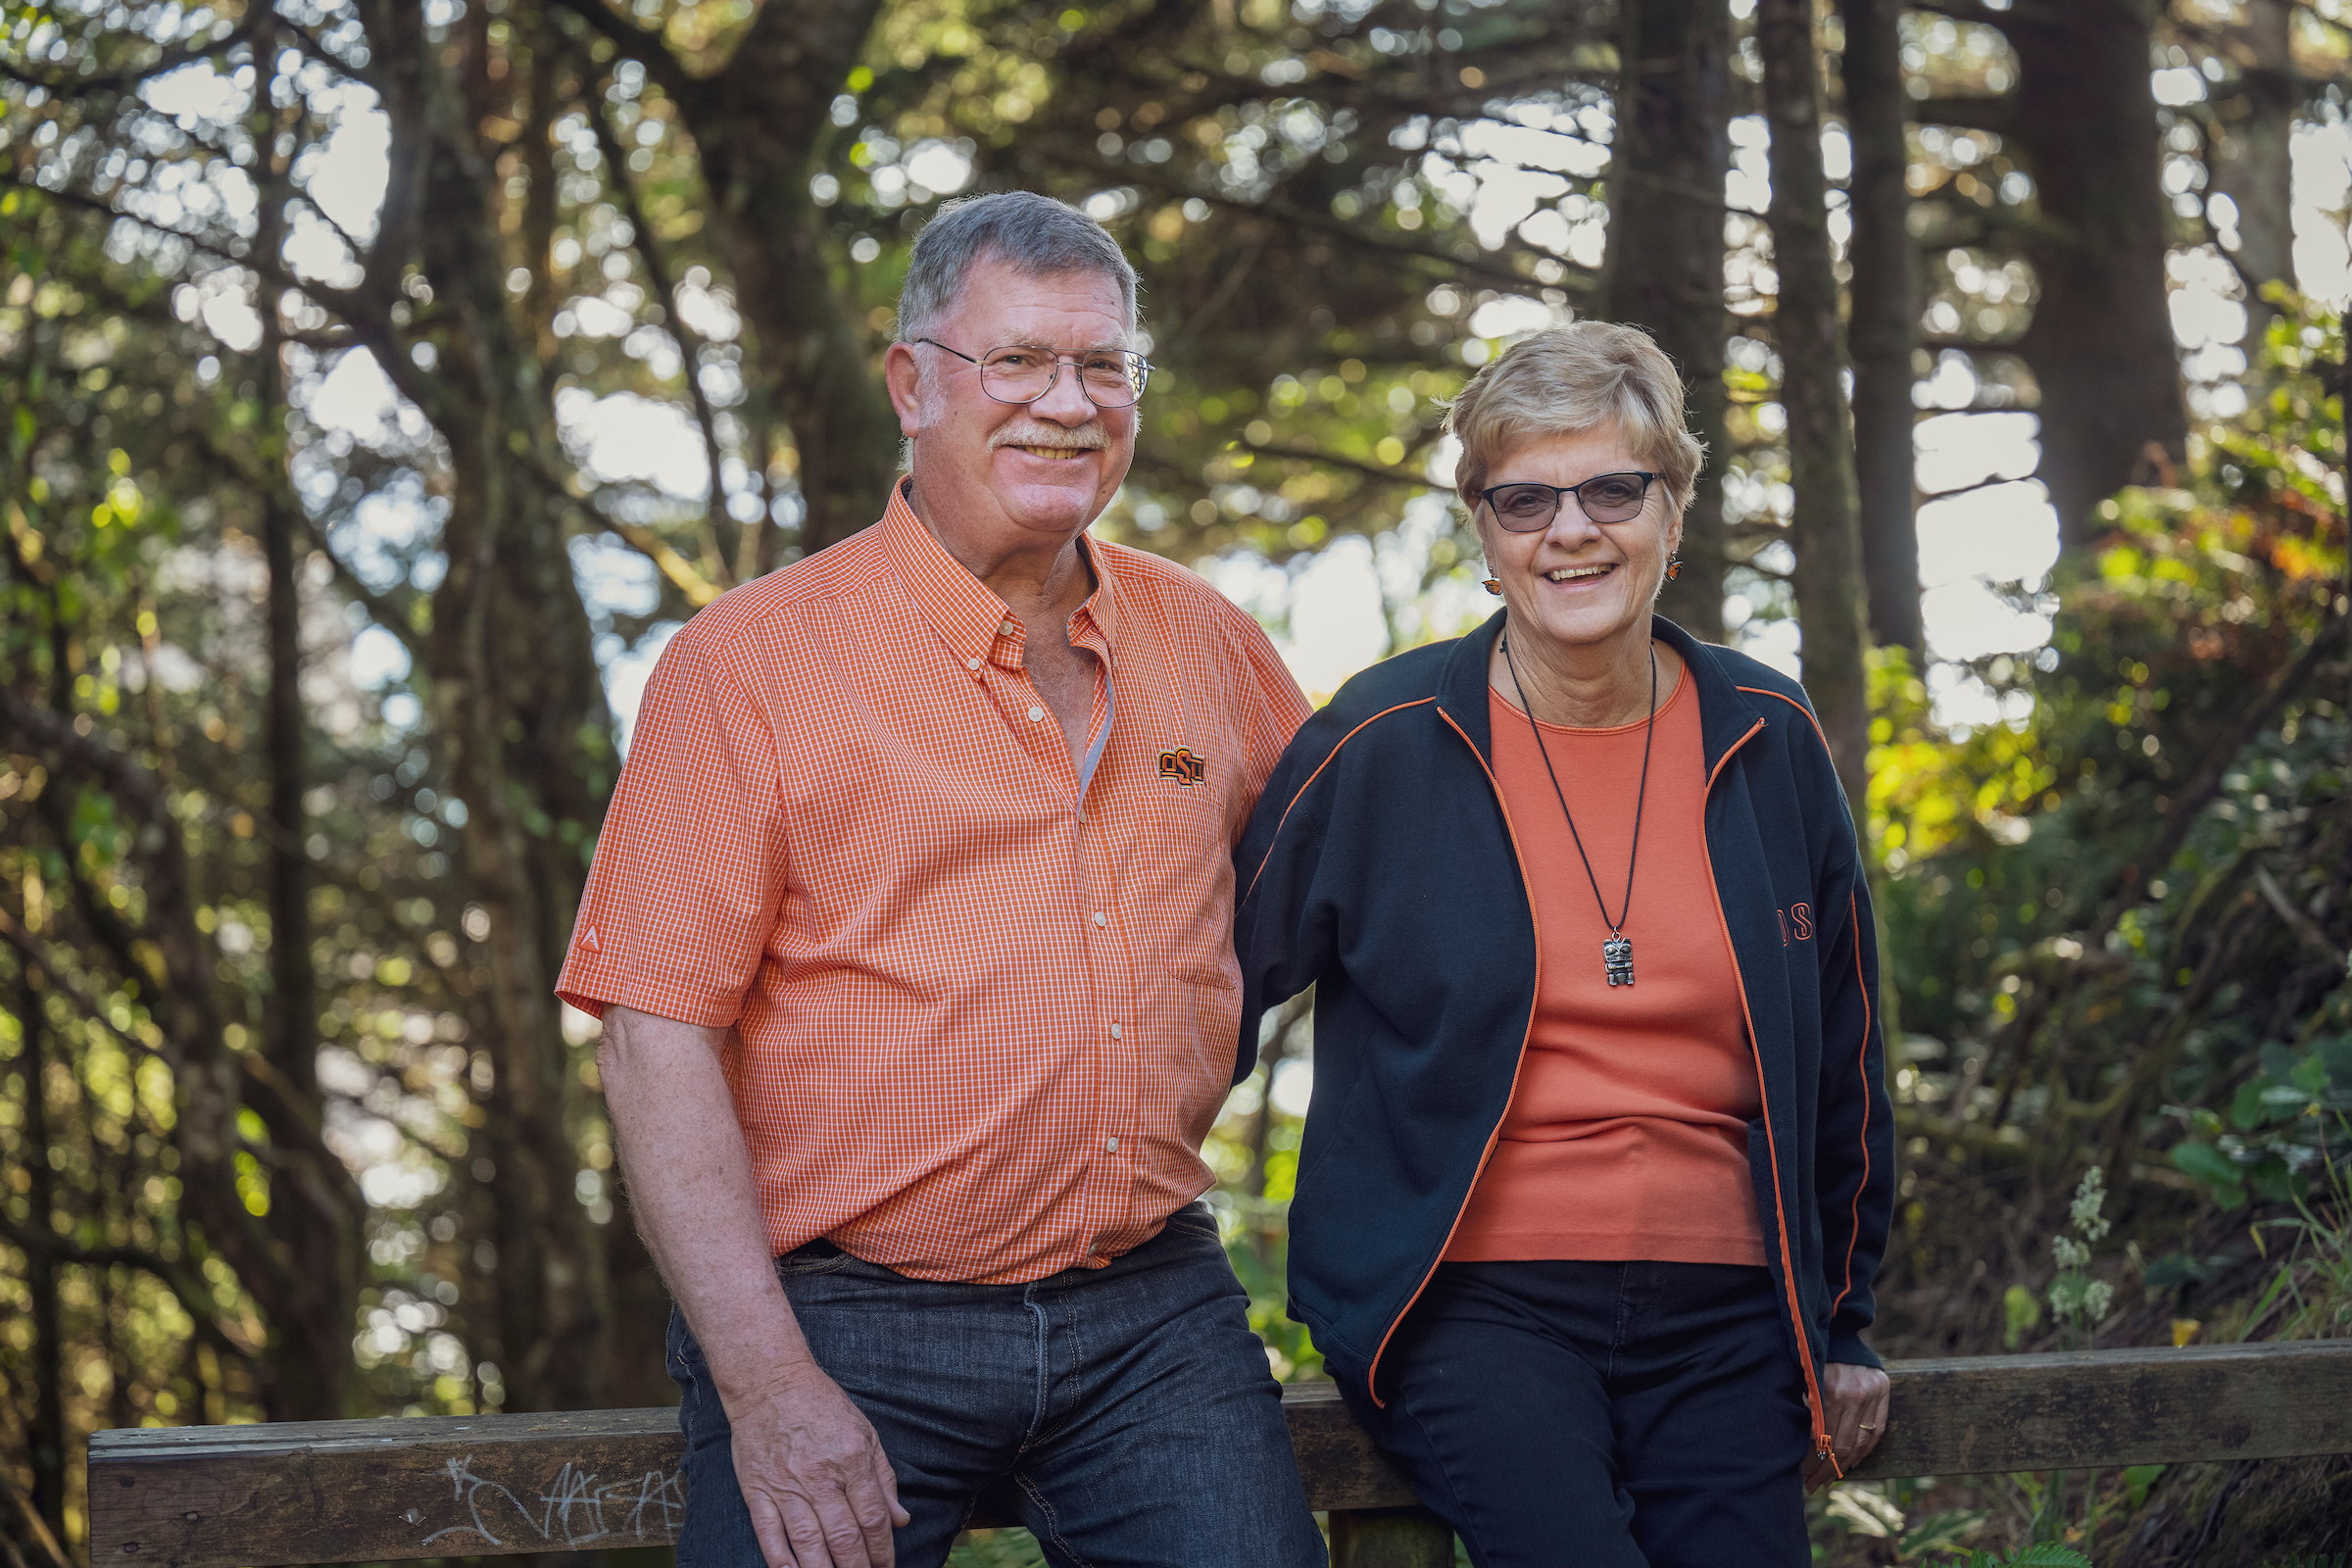 Nancy and Kent Searles wearing orange, background is of Oregon coast trees and you can see hints of the ocean behind the trees